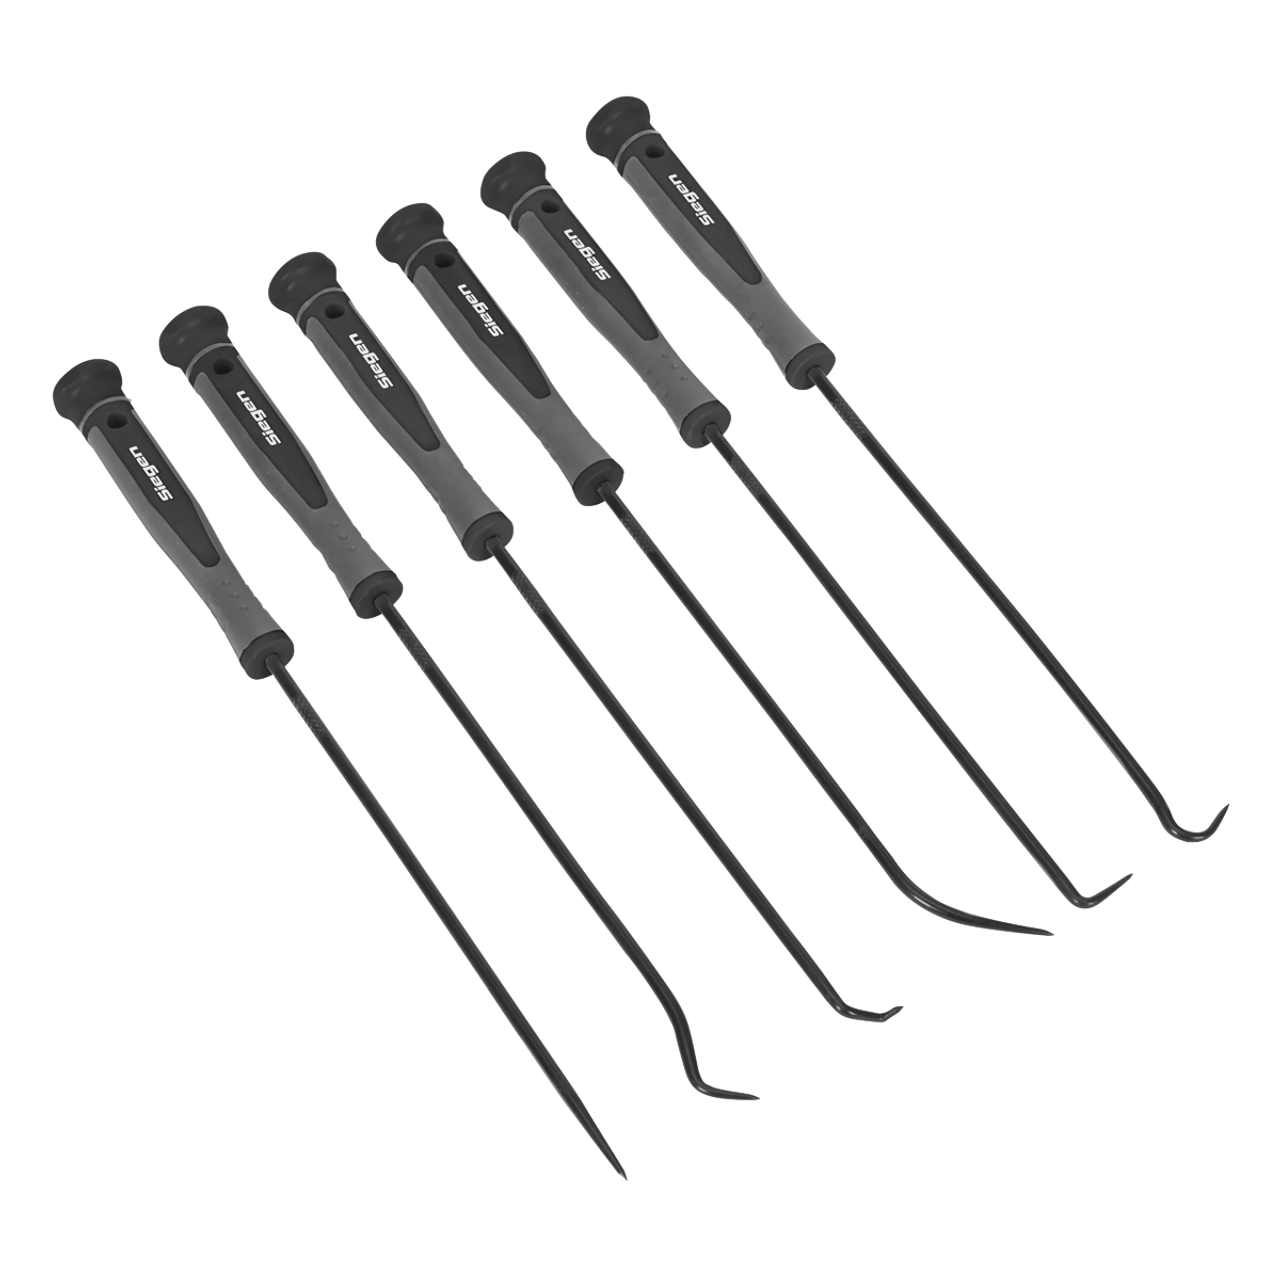 Silverline Pick and Hook 4 Piece Tool Set 427723